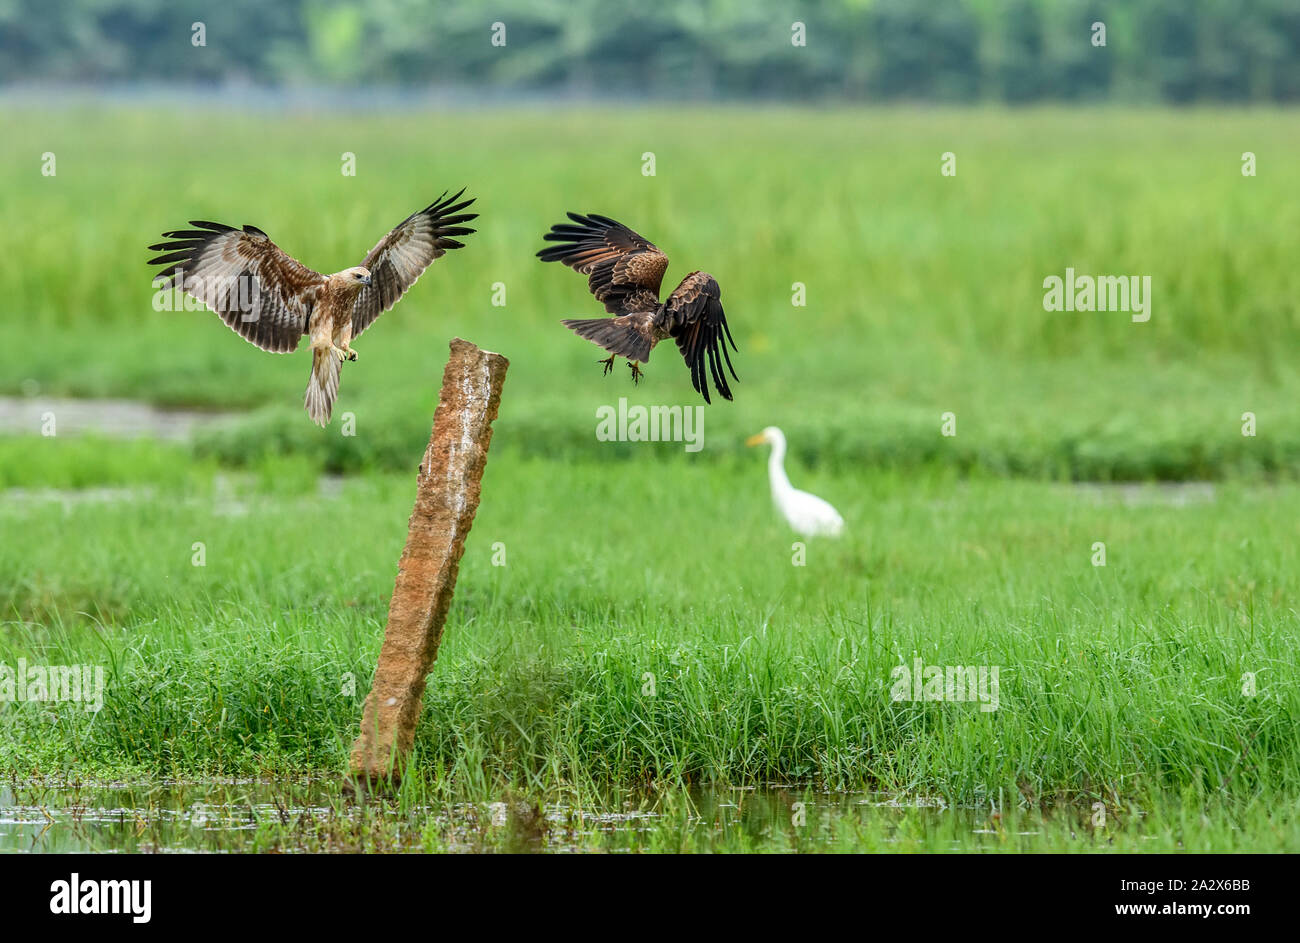 Juvenile Brahminy Kites fighting each other with a green background Stock Photo